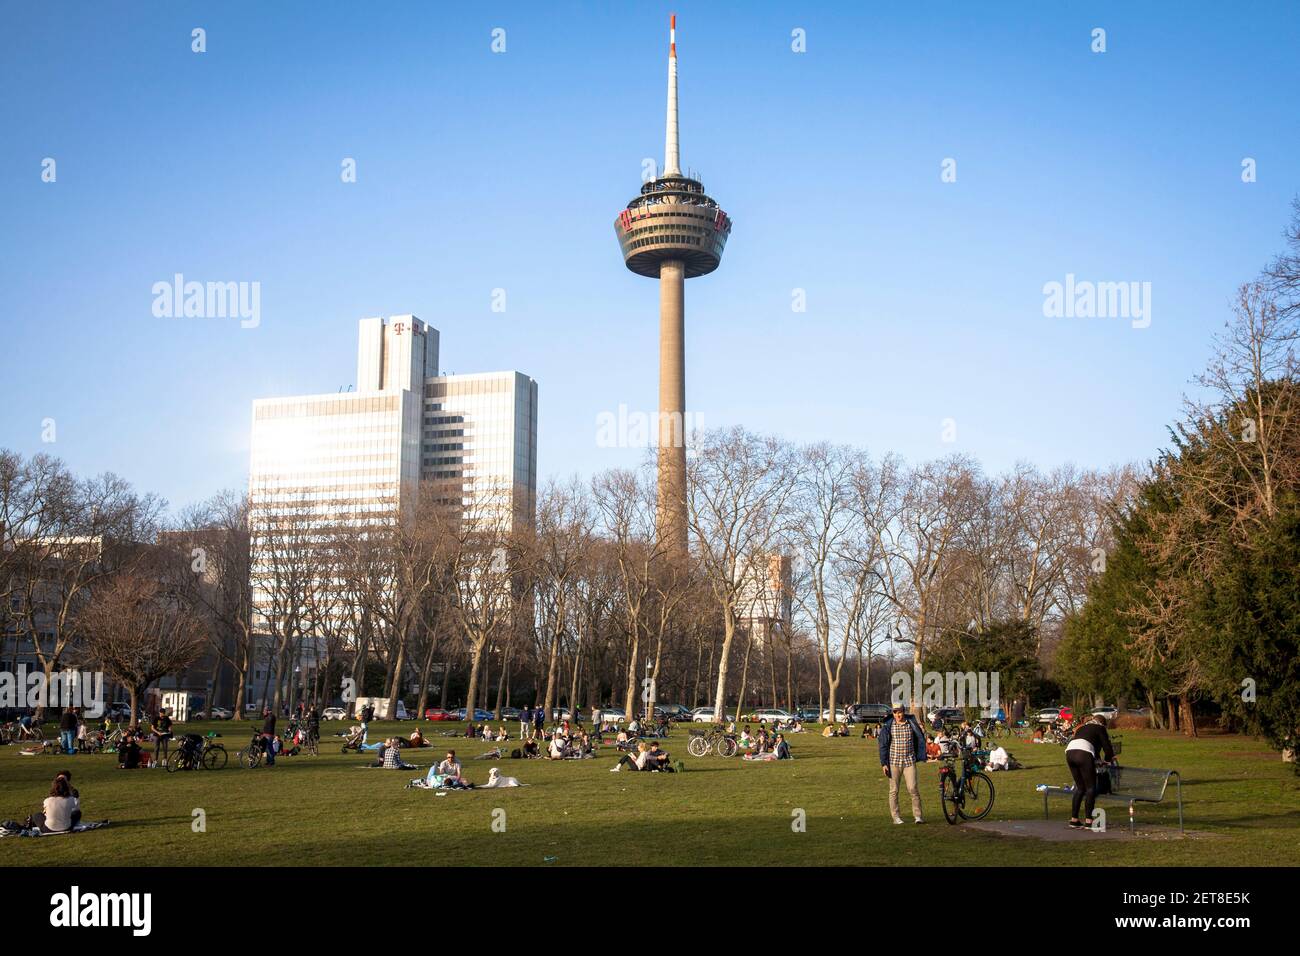 people enjoying an exceptionally warm day on February 24th. 2021 in the park Innerer Gruenguertel, Colonius television tower, Cologne, Germany.  Mensc Stock Photo